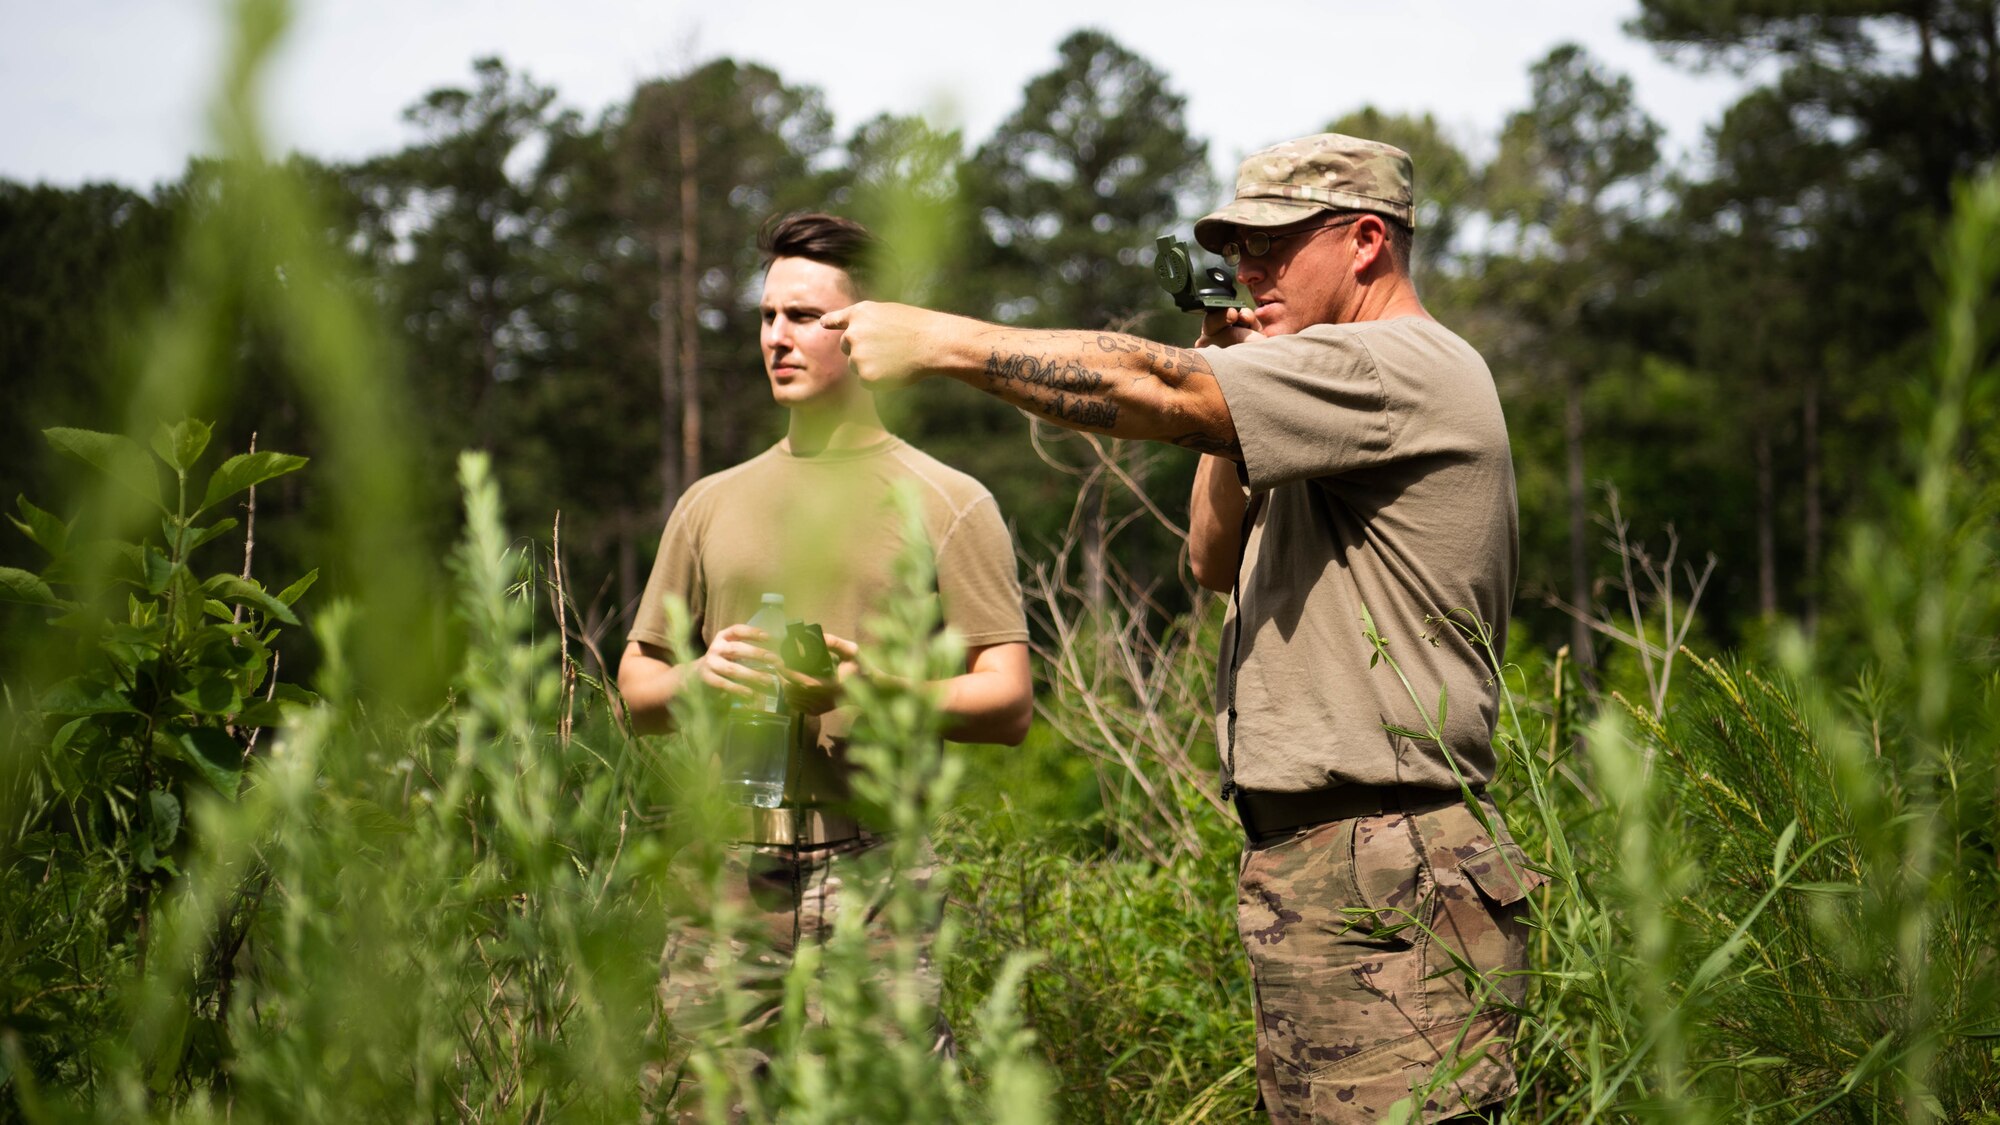 Airmen from the 2nd Civil Engineer Squadron perform land navigation during a 2nd CES training exercise at Barksdale Air Force Base, Louisiana, May 20, 2021. Training operational skills such as land navigation, weapons assembly and individual movement techniques, the 2nd CES intensified the readiness of it’s engineers, allowing the unit to better adapt to changes in the national security environment and compete in the dynamic future of warfighting. (U.S. Air Force photo by Senior Airman Jacob B. Wrightsman)